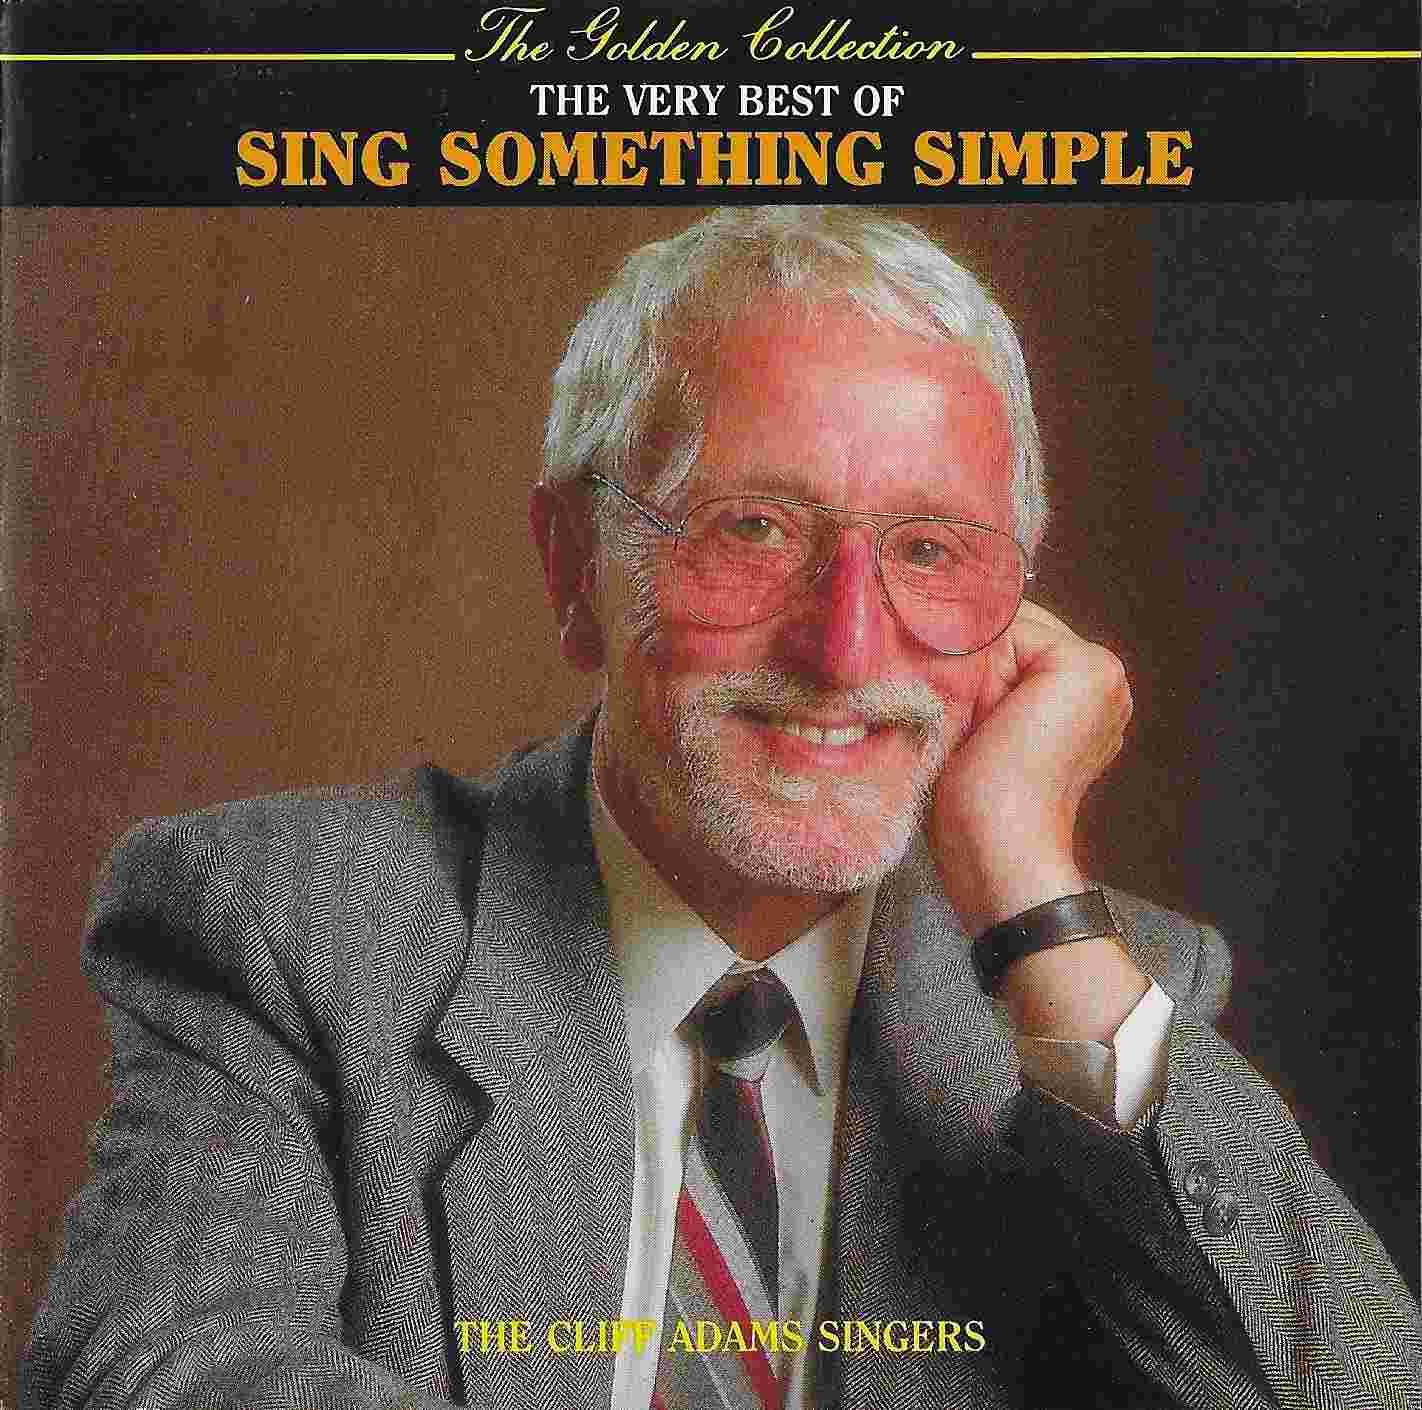 Picture of The very best of Sing Something Simple by artist Various from the BBC cds - Records and Tapes library